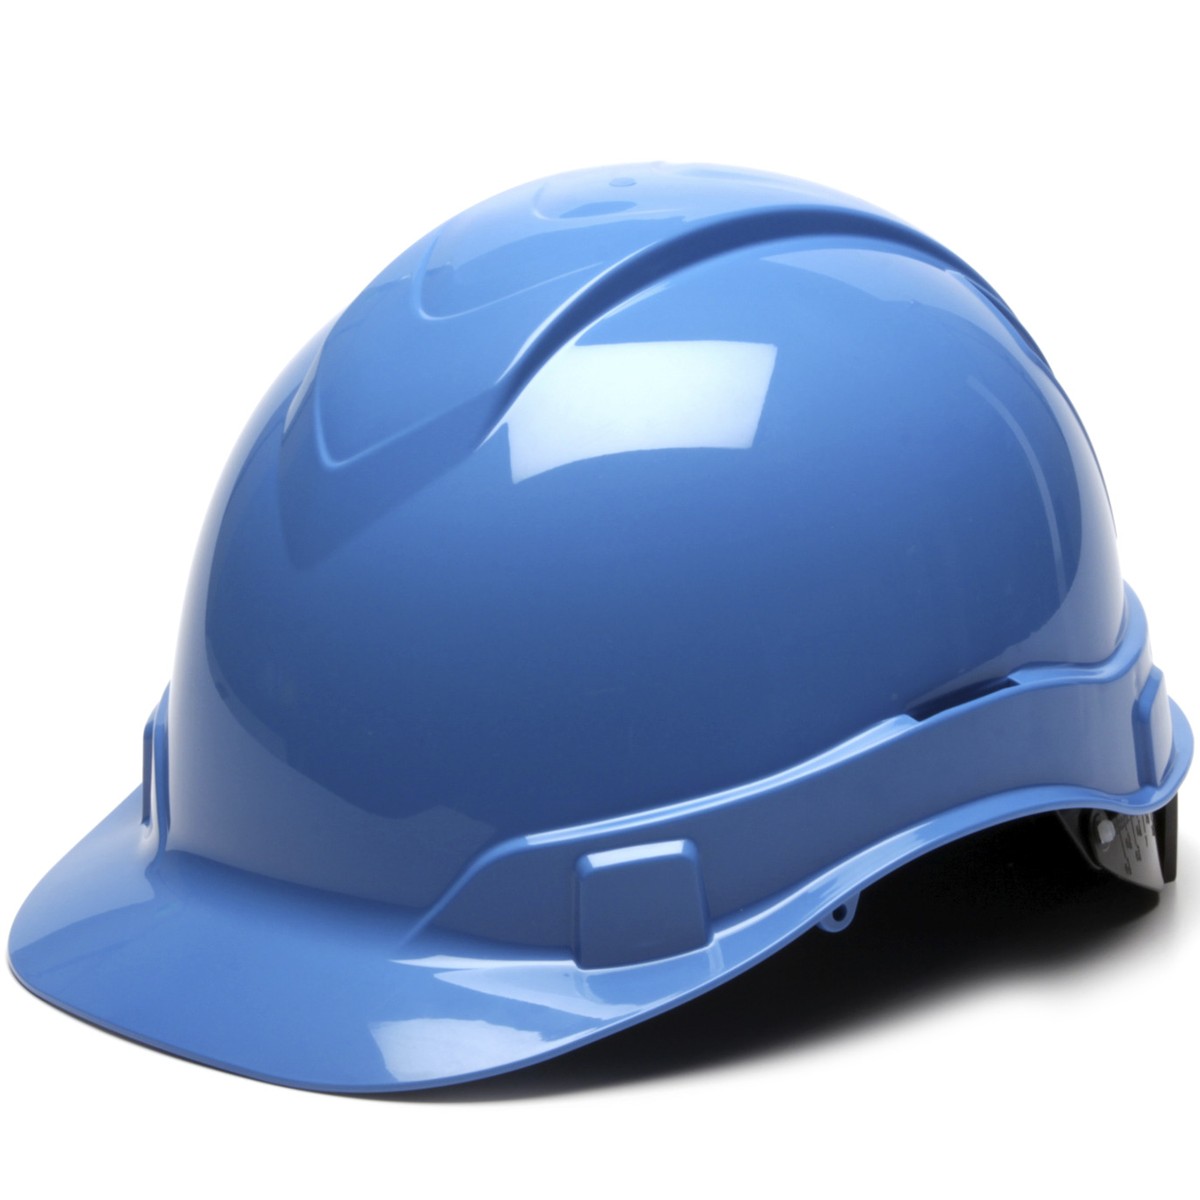 Pyramex Ridgeline Cap Style Hard Hat with 4 Point Ratchet Suspension from Columbia Safety